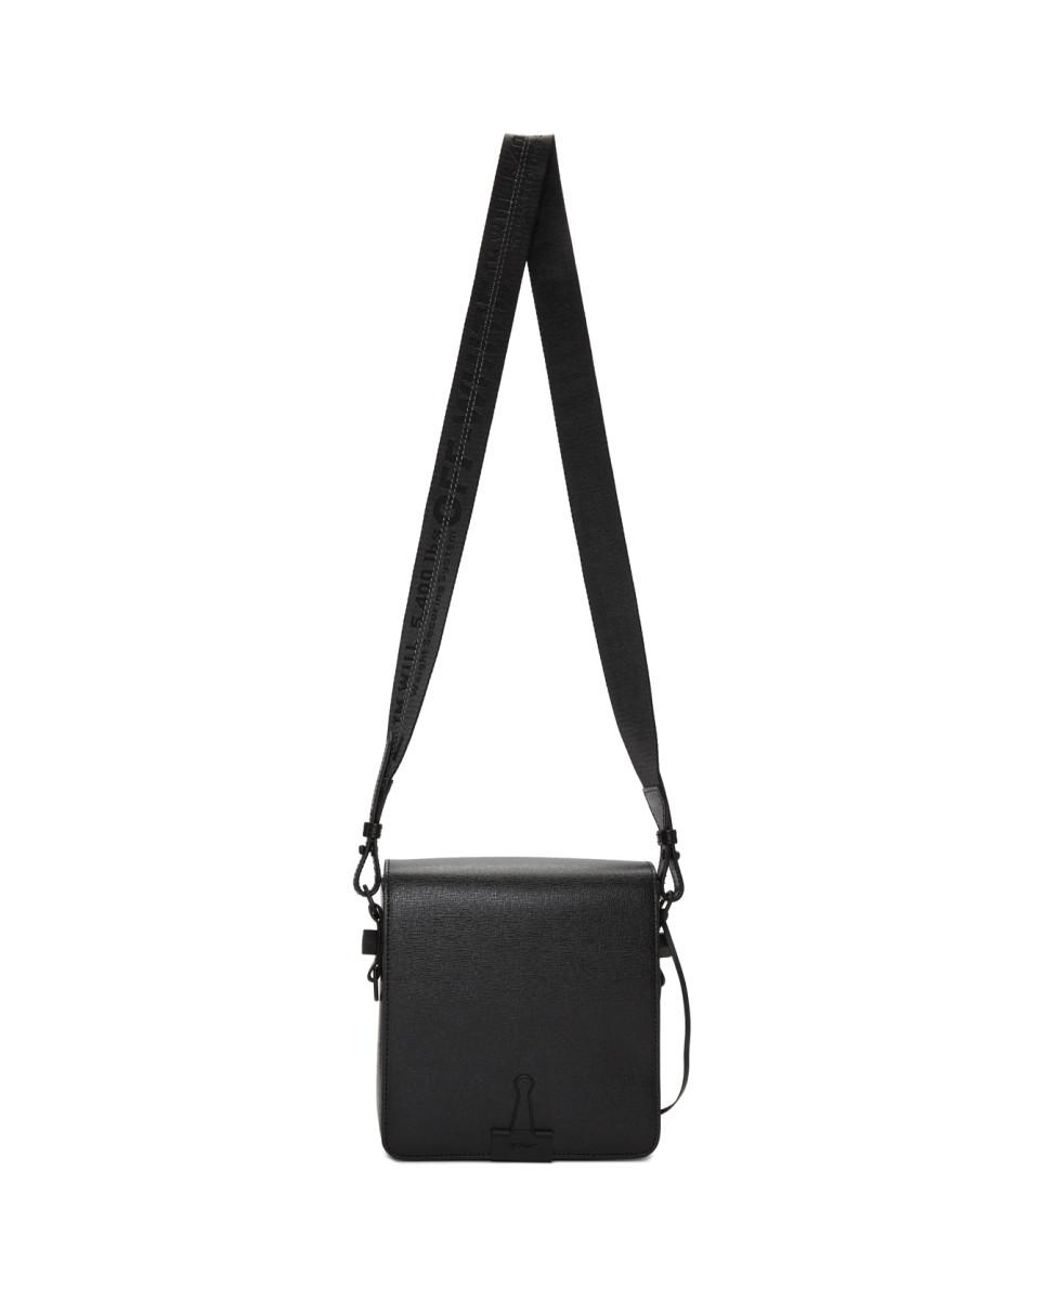 Off-White ,Binder Clip Hand Bag in Patent Black BNWT OS